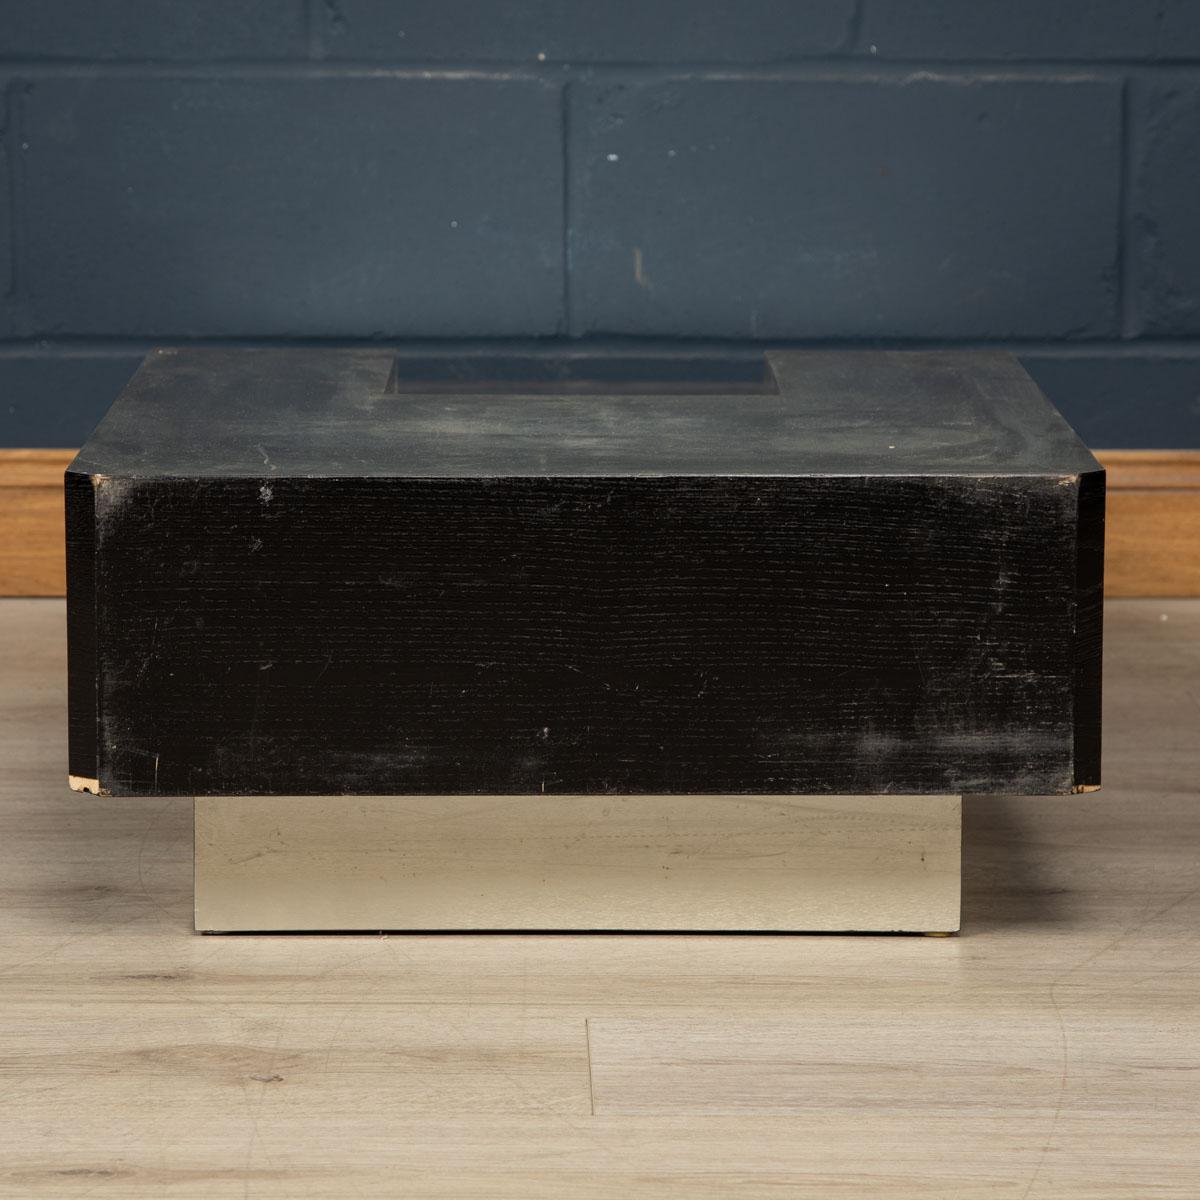 20th Century Coffee Table With A Dry Bar Compartment By Willy Rizzo, Italy 1